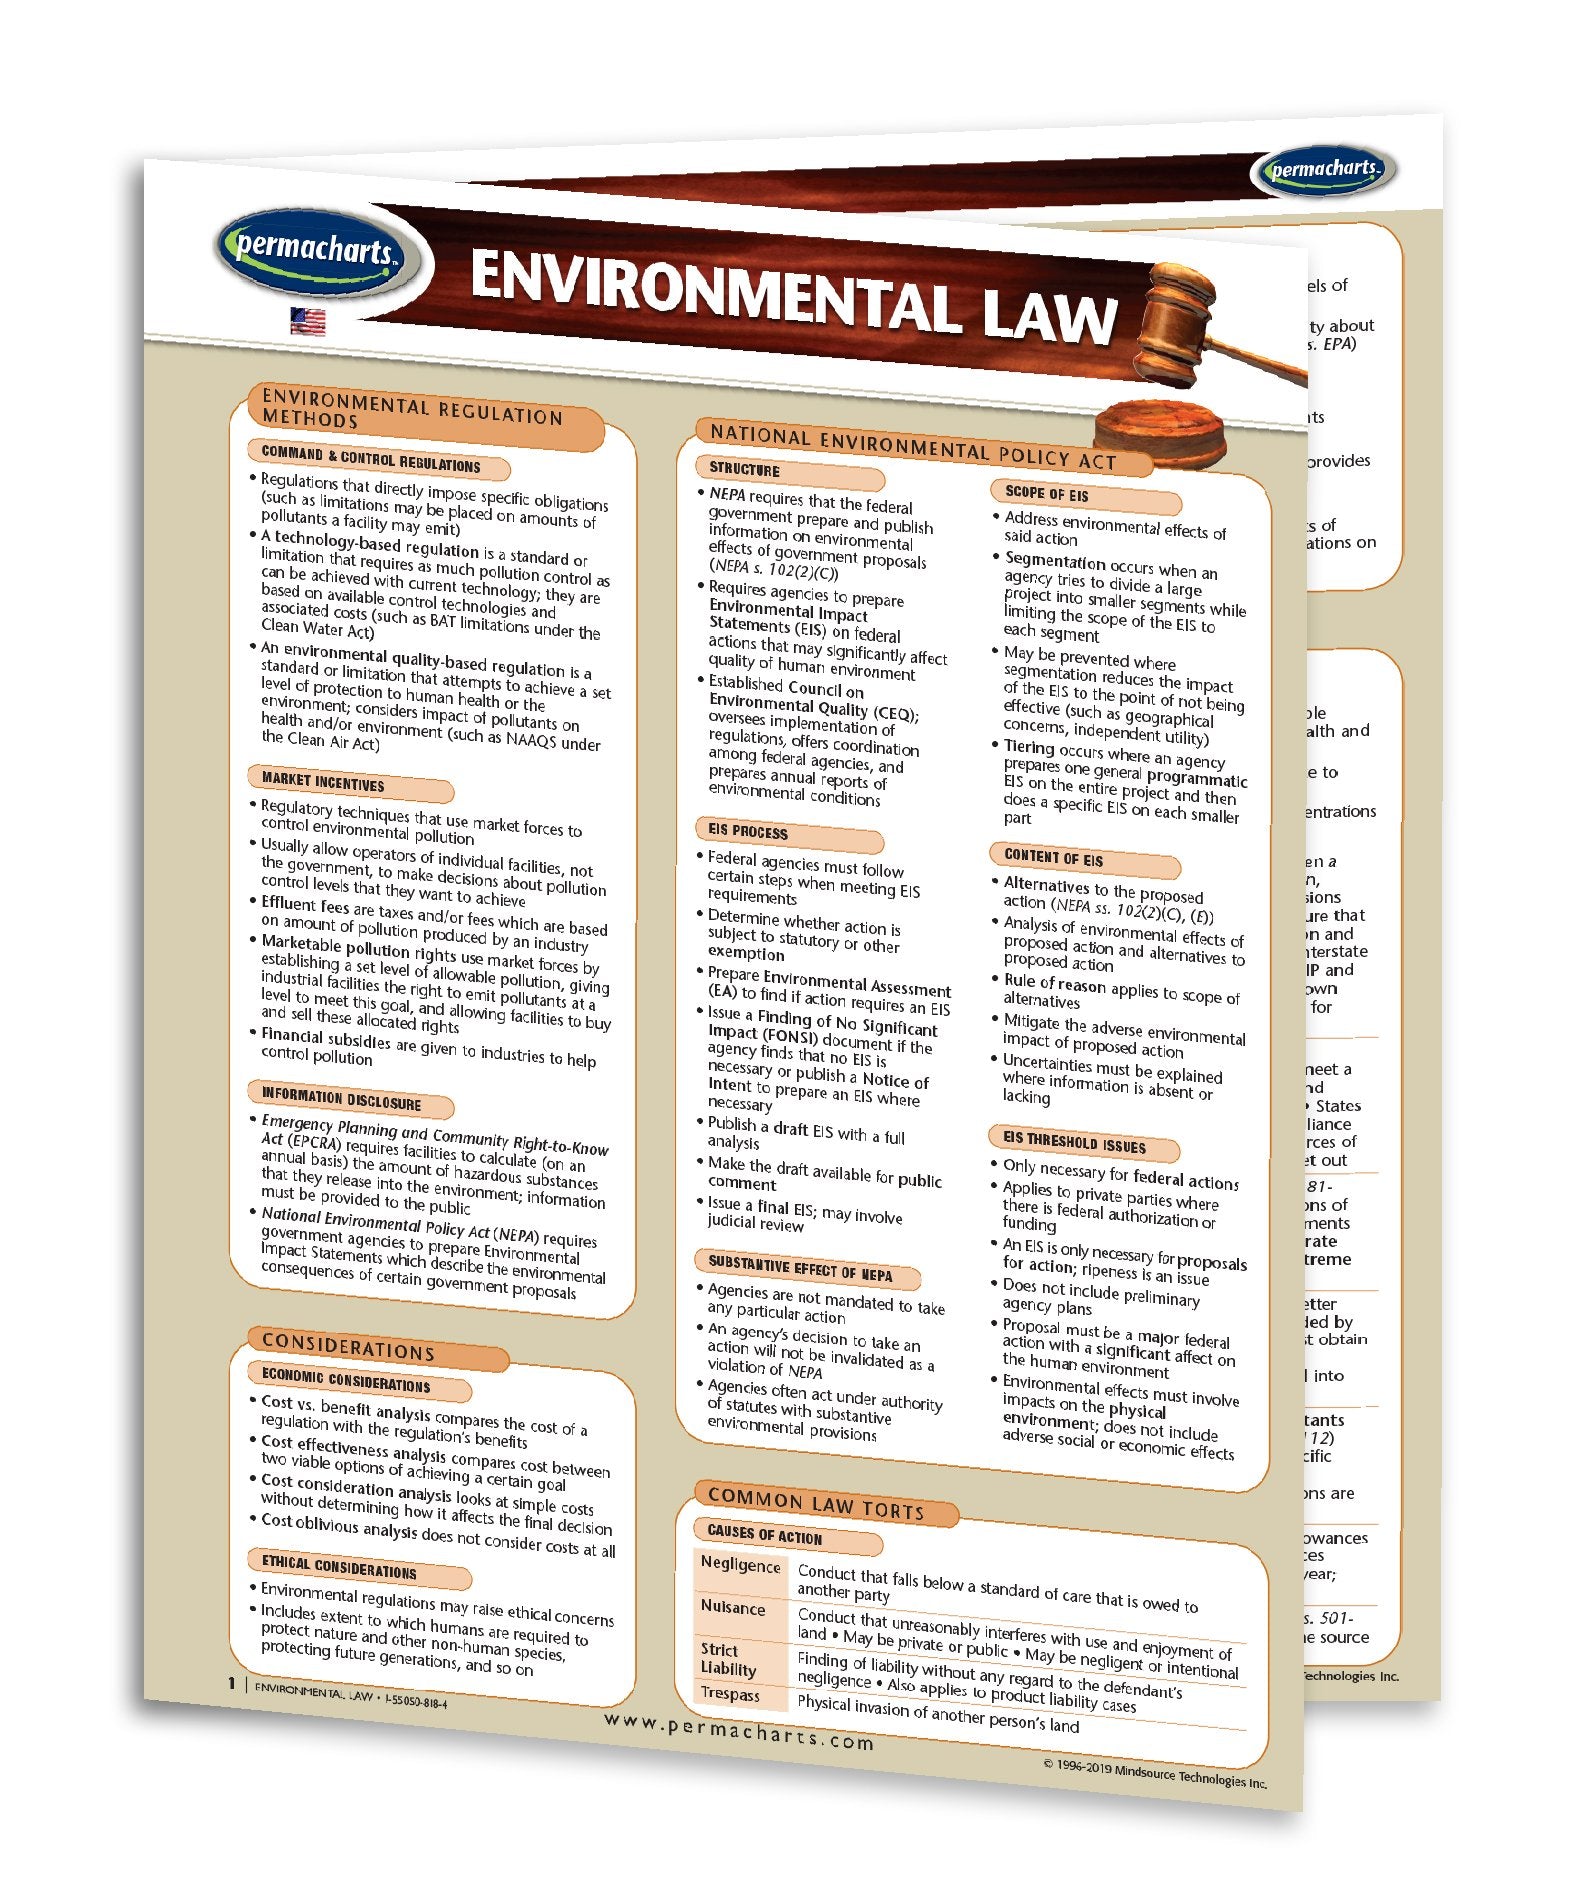 research topics on environmental law